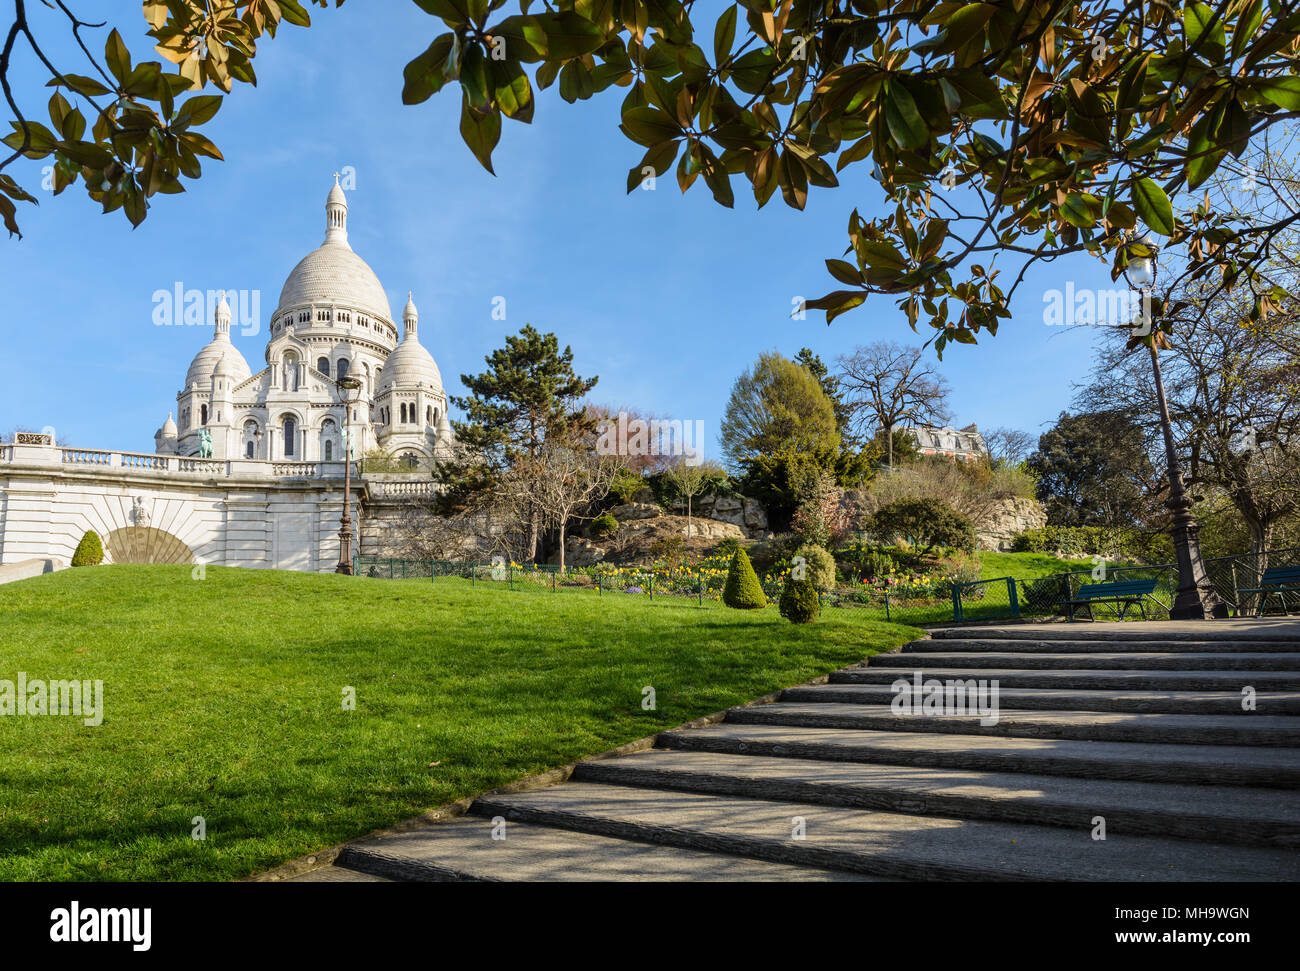 The basilica of the Sacred Heart of Paris at the top of the Montmartre hill seen from the Louise Michel park with foliage and stairs in the foreground Stock Photo